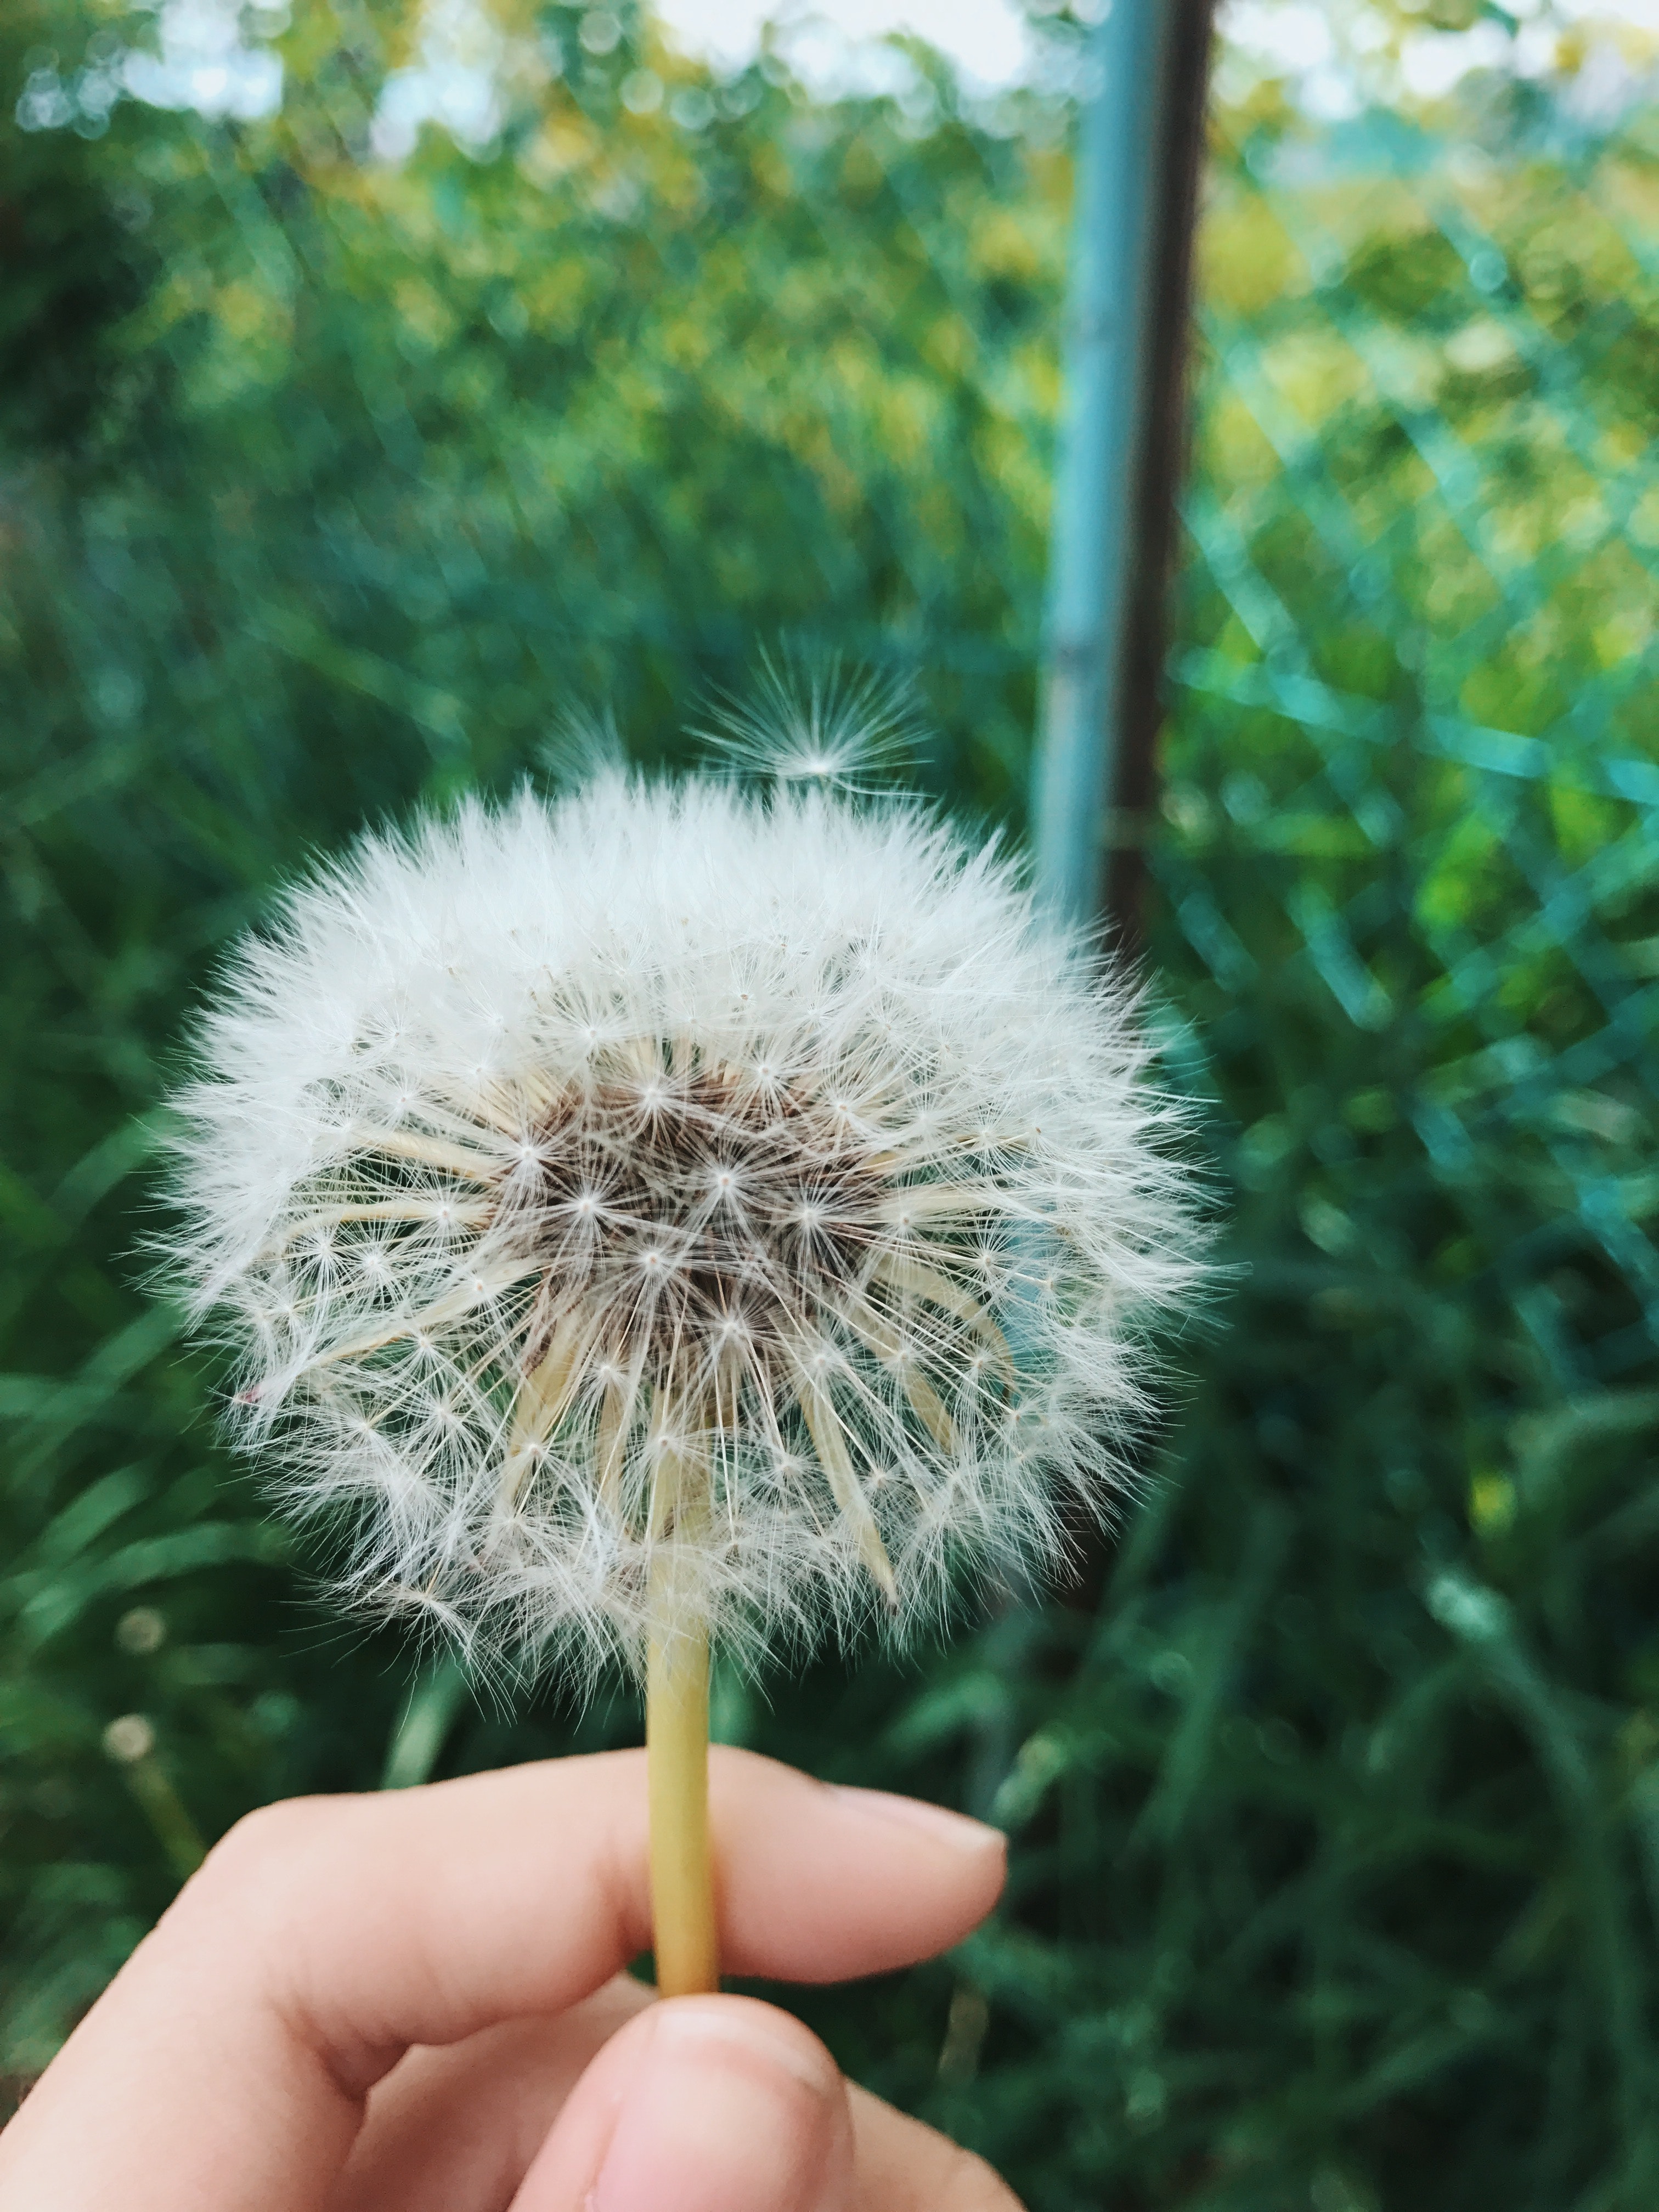 Person holding dandelion flower at daytime photo